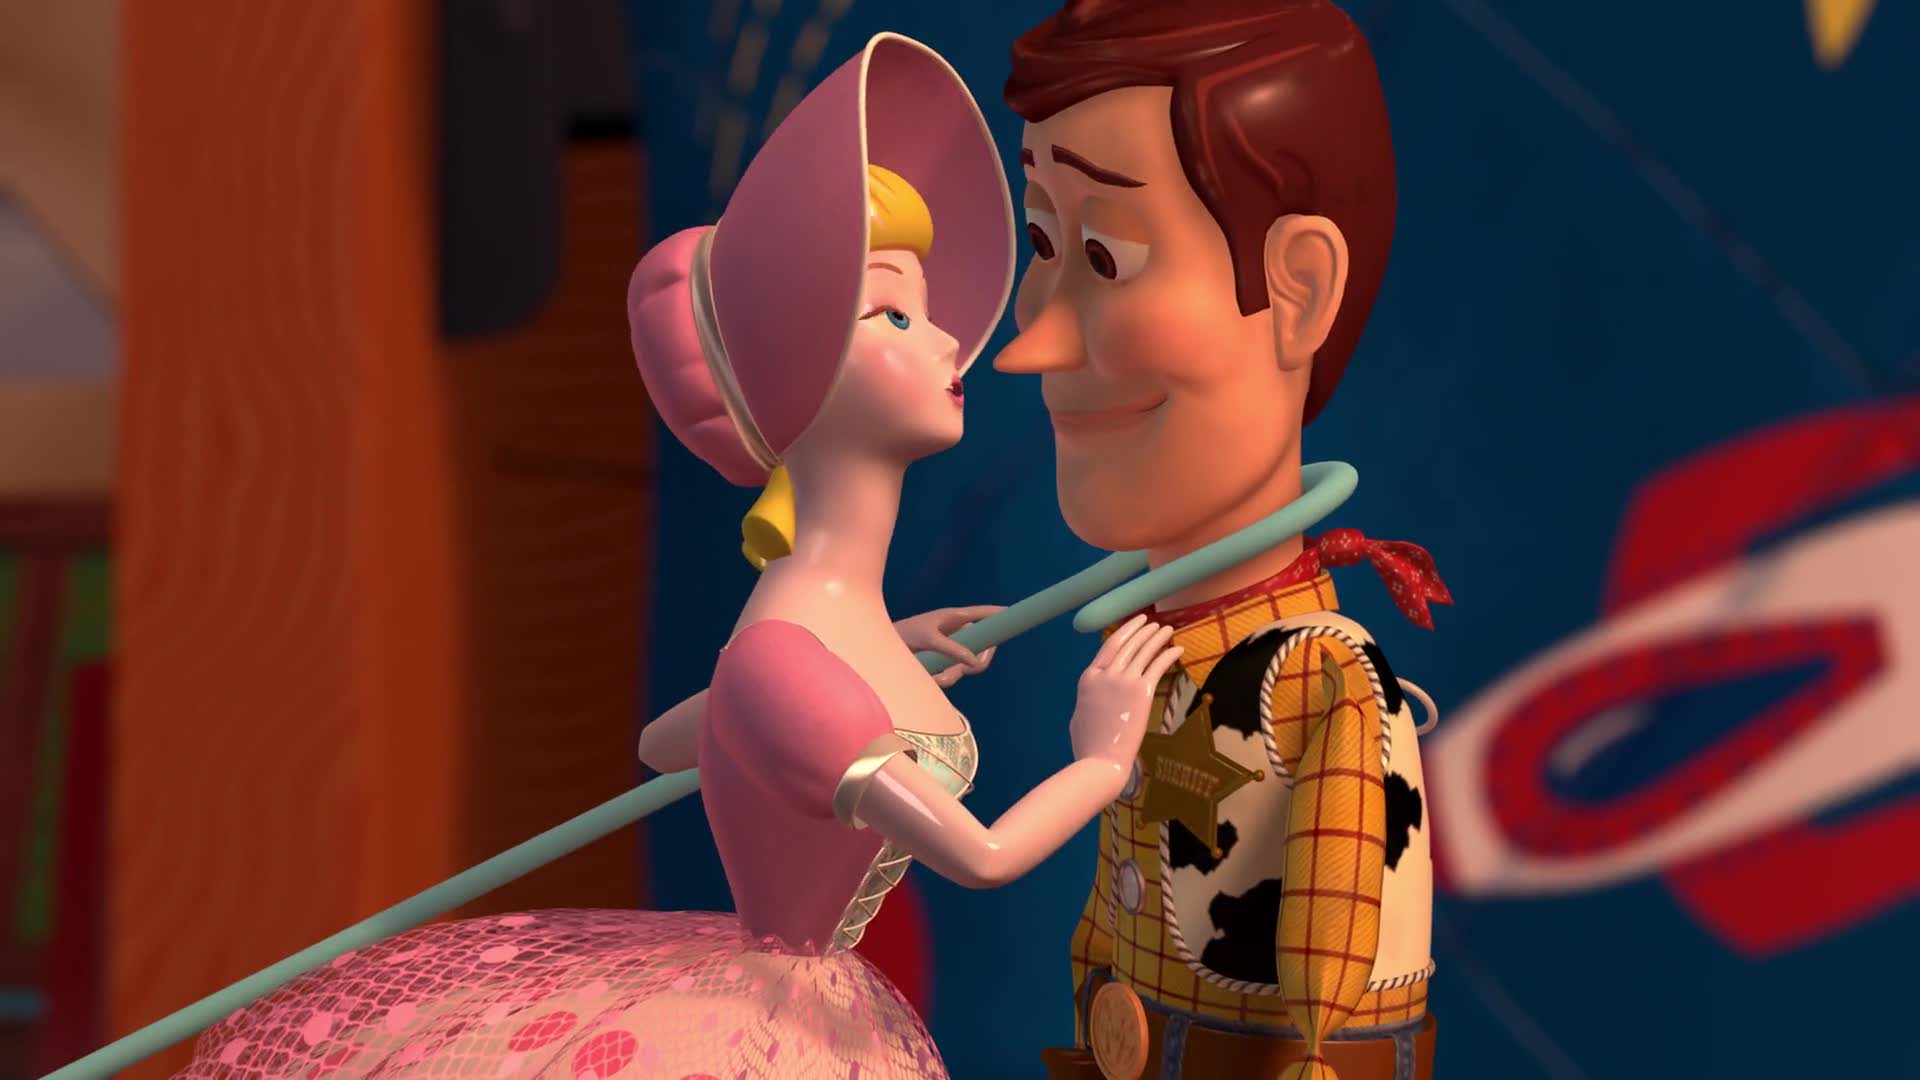 Toy Story 4' will be a love story about Woody and Bo Peep, Disney confirms